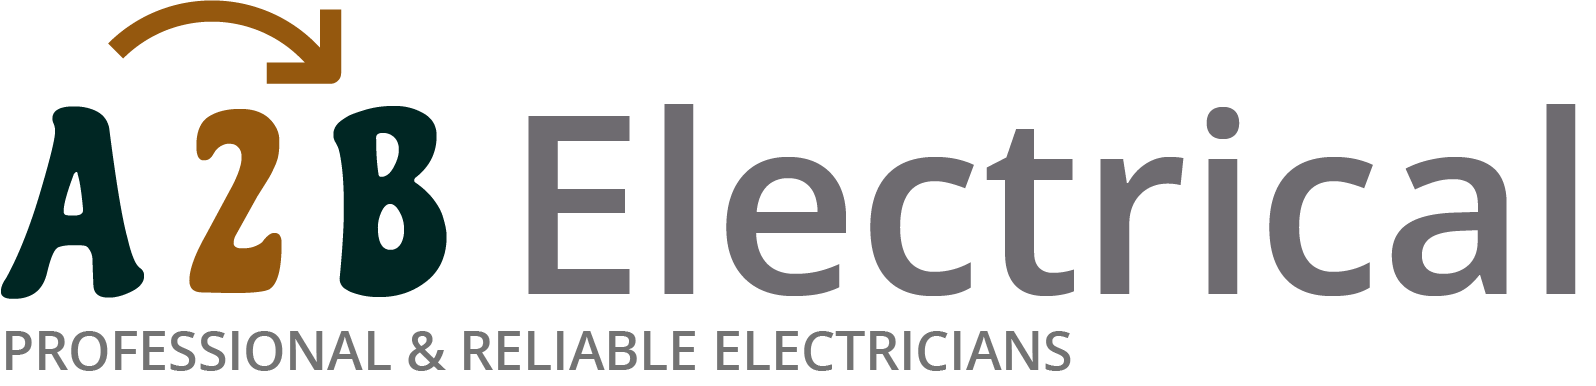 If you have electrical wiring problems in Blyth, we can provide an electrician to have a look for you. 